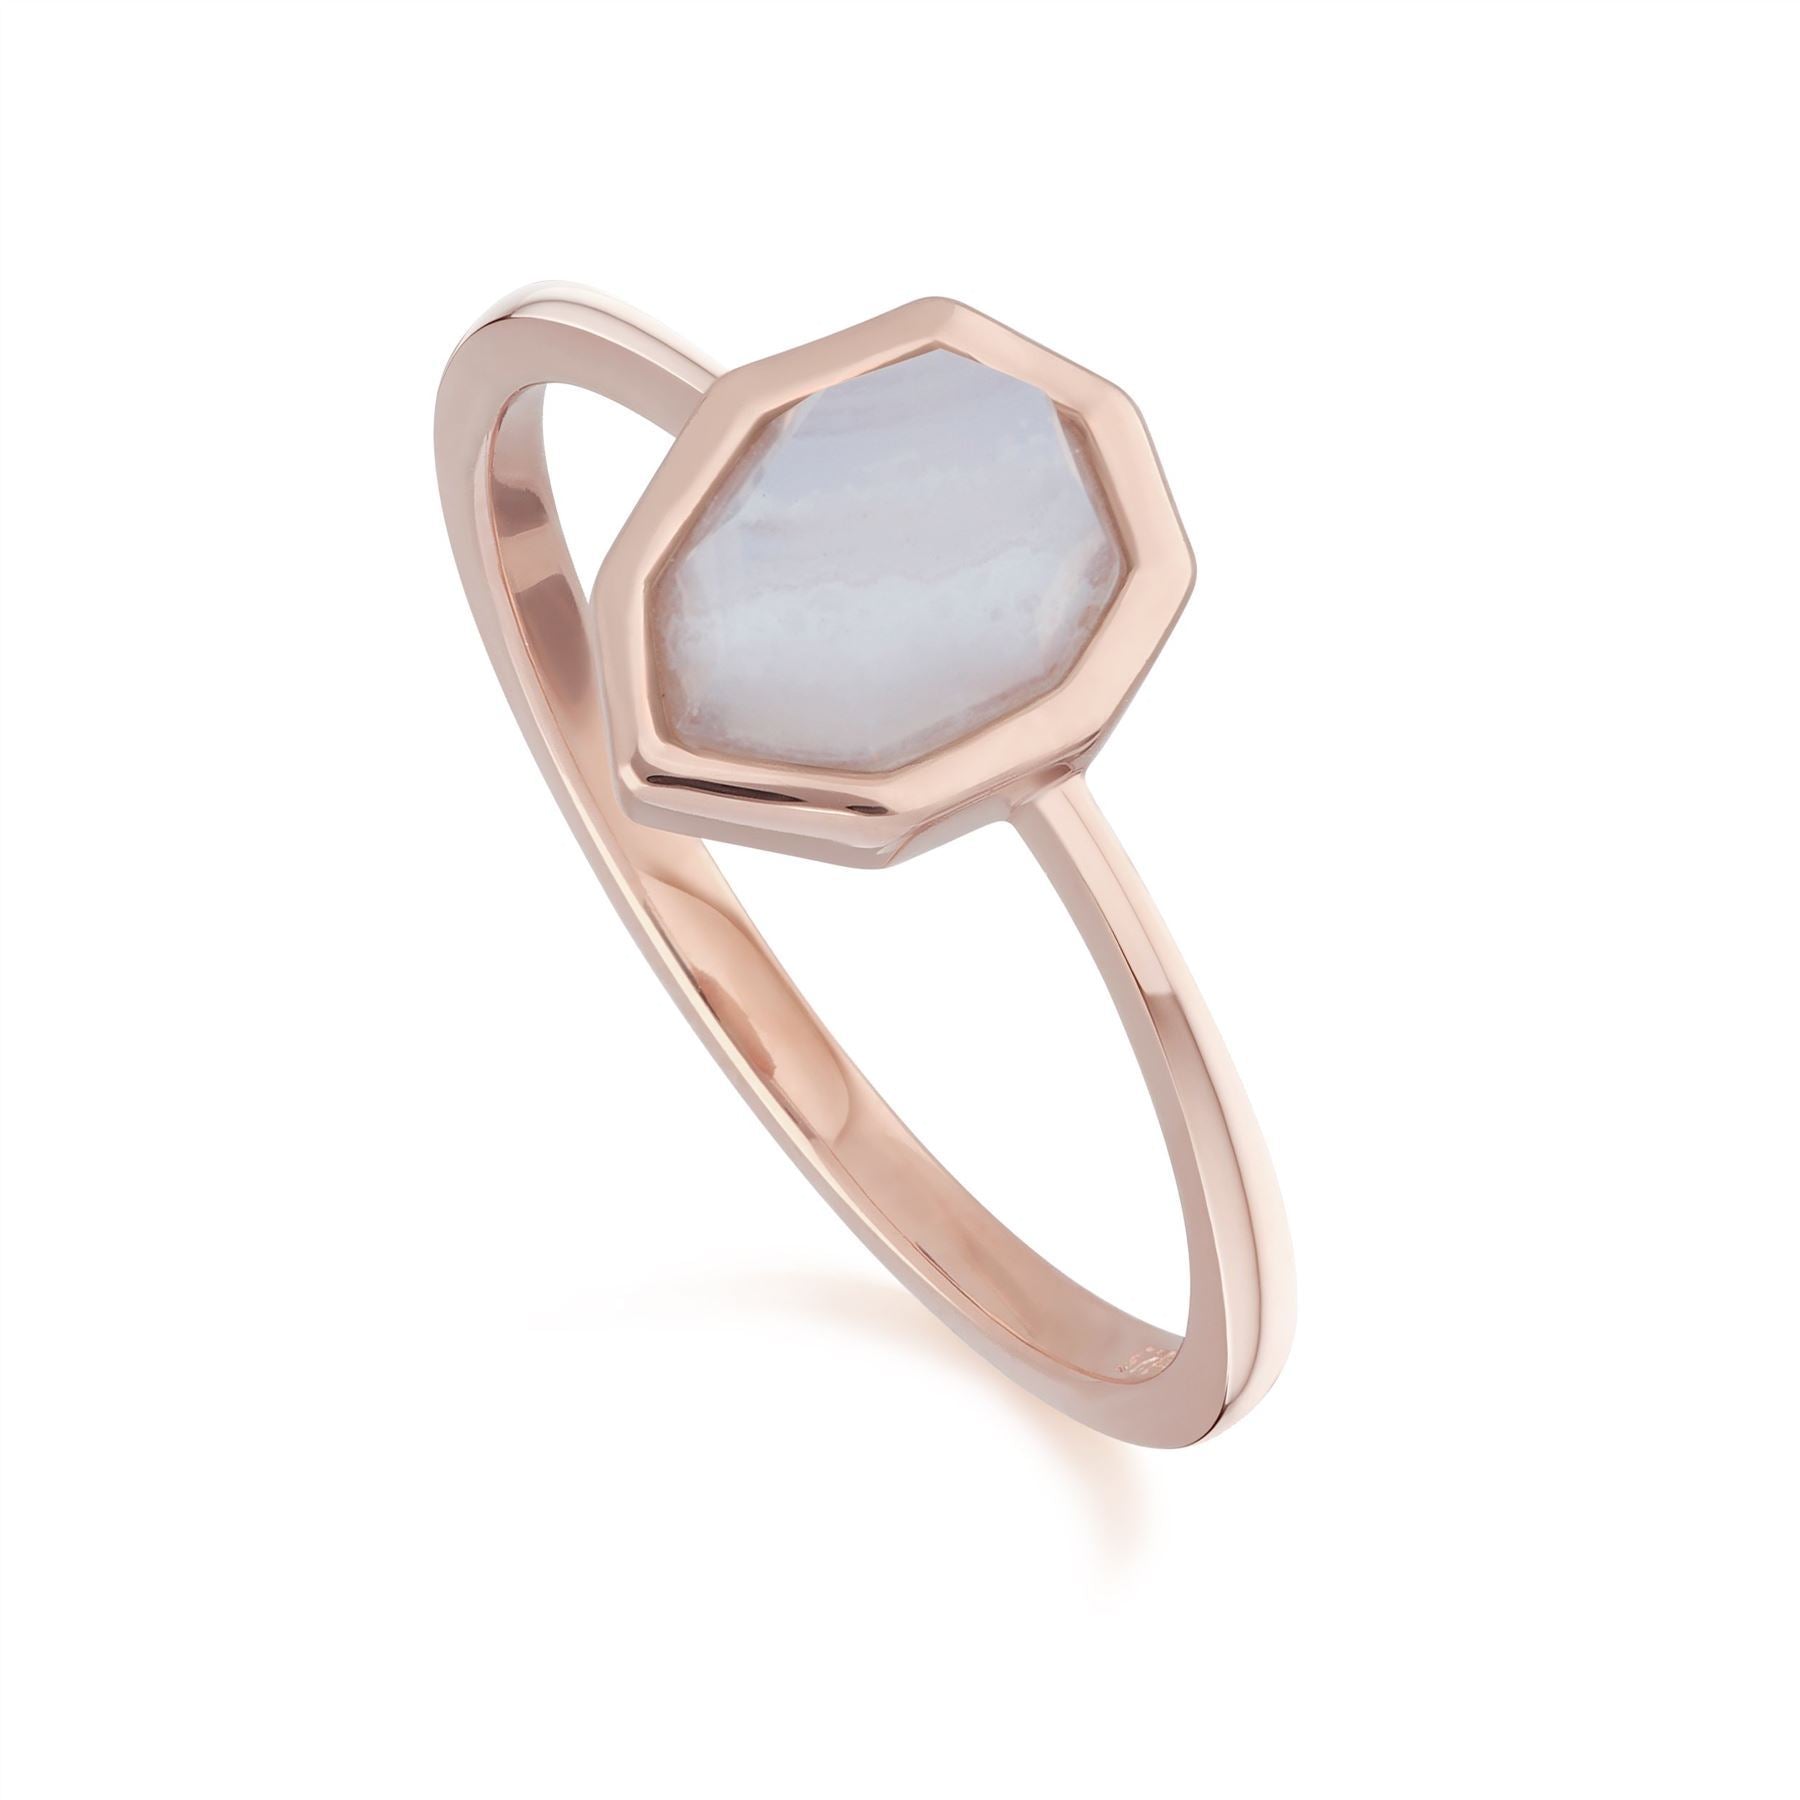 Irregular B Gem Blue Lace Agate Ring in Rose Gold Plated Sterling Silver Side